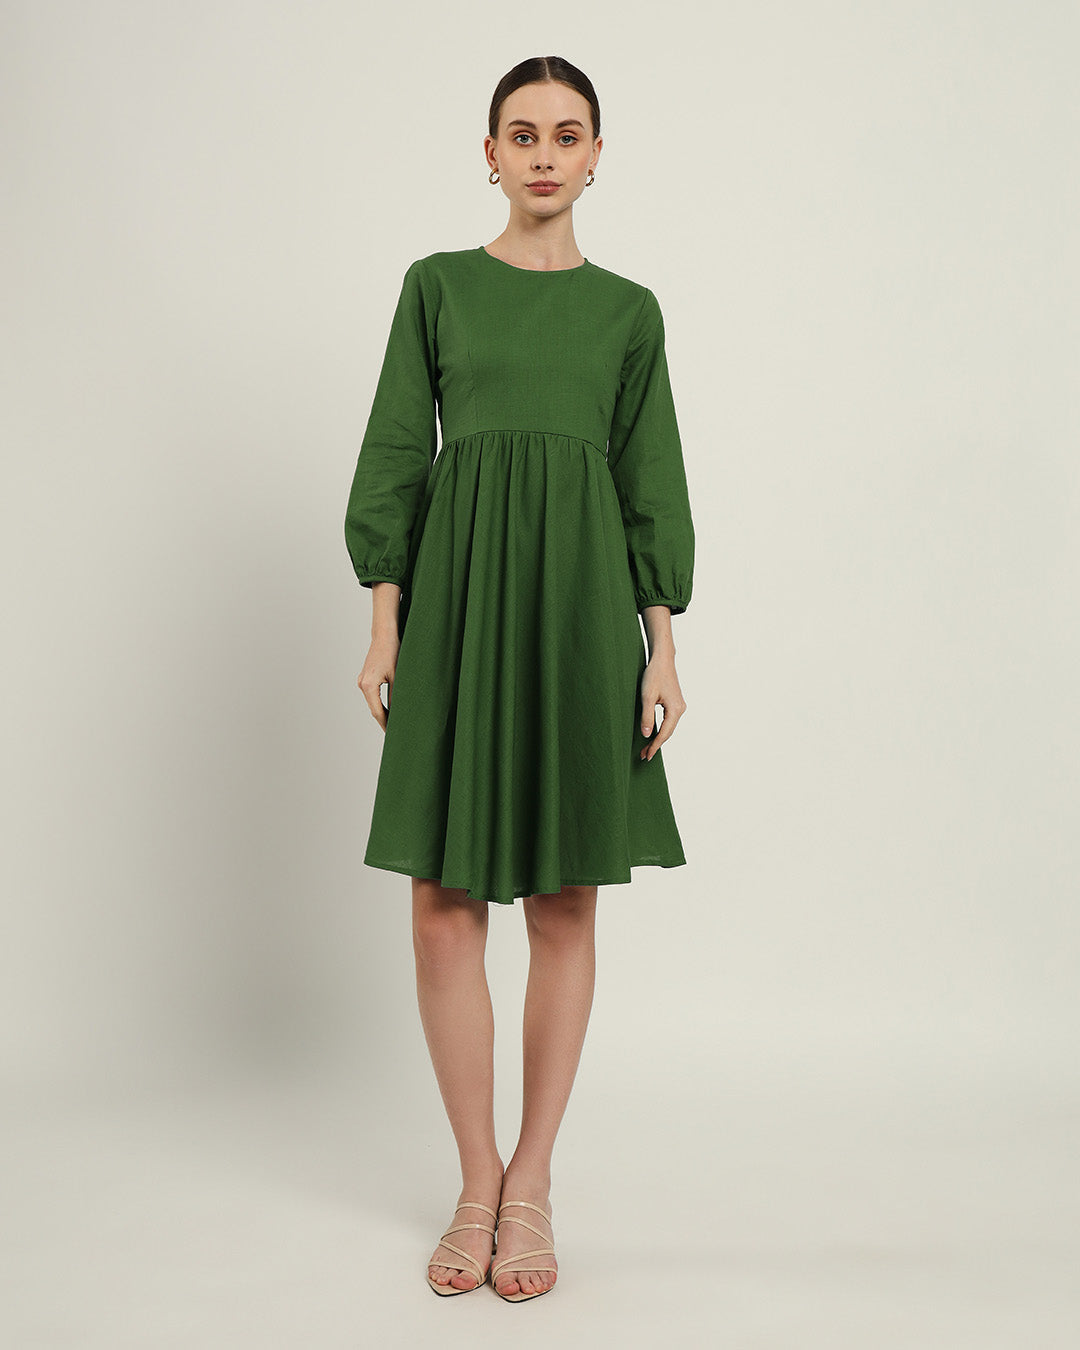 The Exeter Emerald Dress